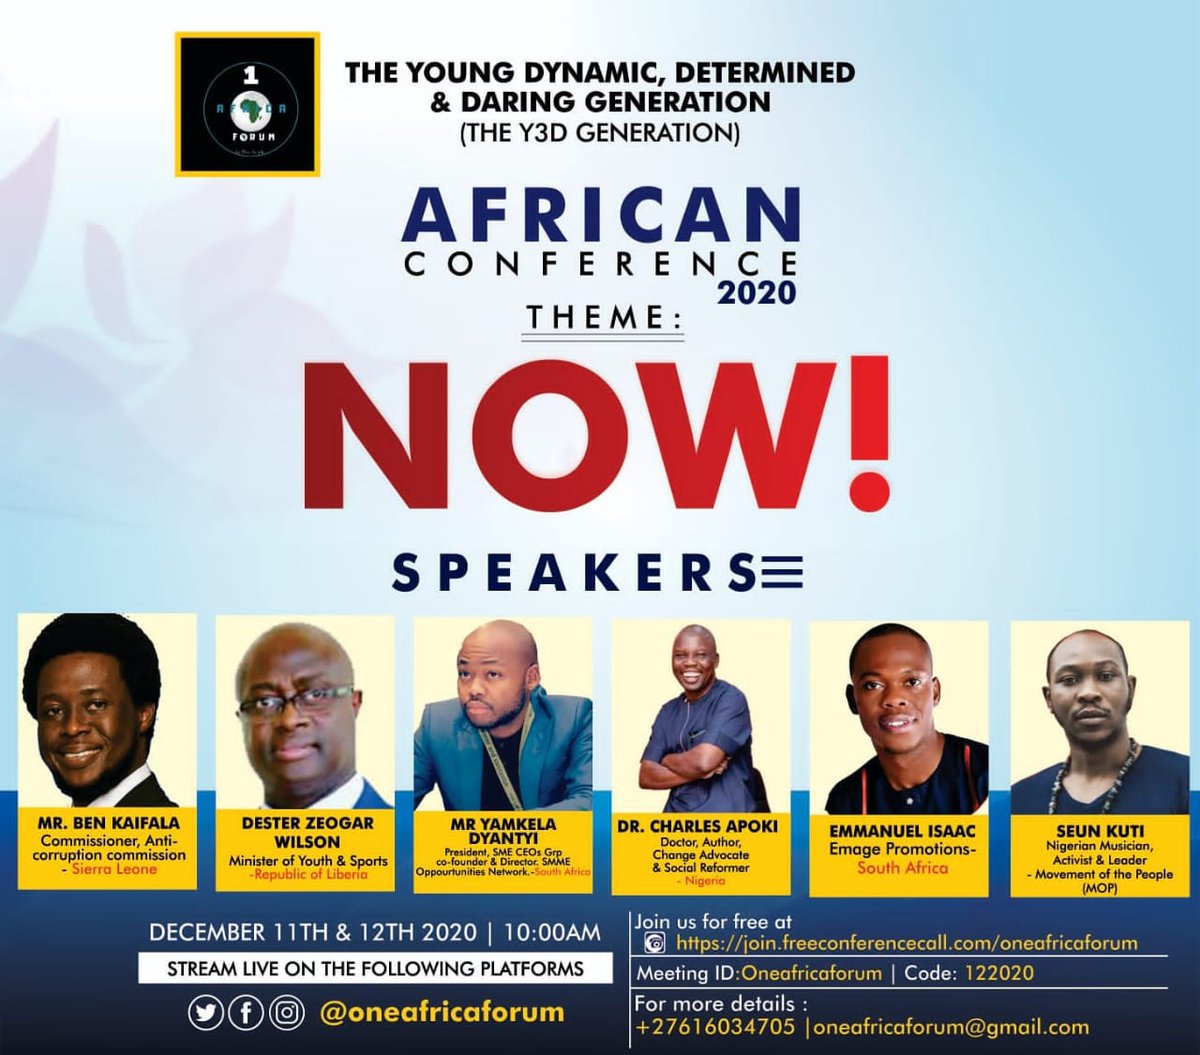 I will be speaking during the One Africa Forum to the 'Young, Determined and Daring Generation (YD3G)' of Africa  on the 'The Dynamics of Corruption in Africa and the Role of the YD3D in Curbing it'. See Flyers for details: #oneafricaforum #TheY3DG #africanconference #OneAfrica